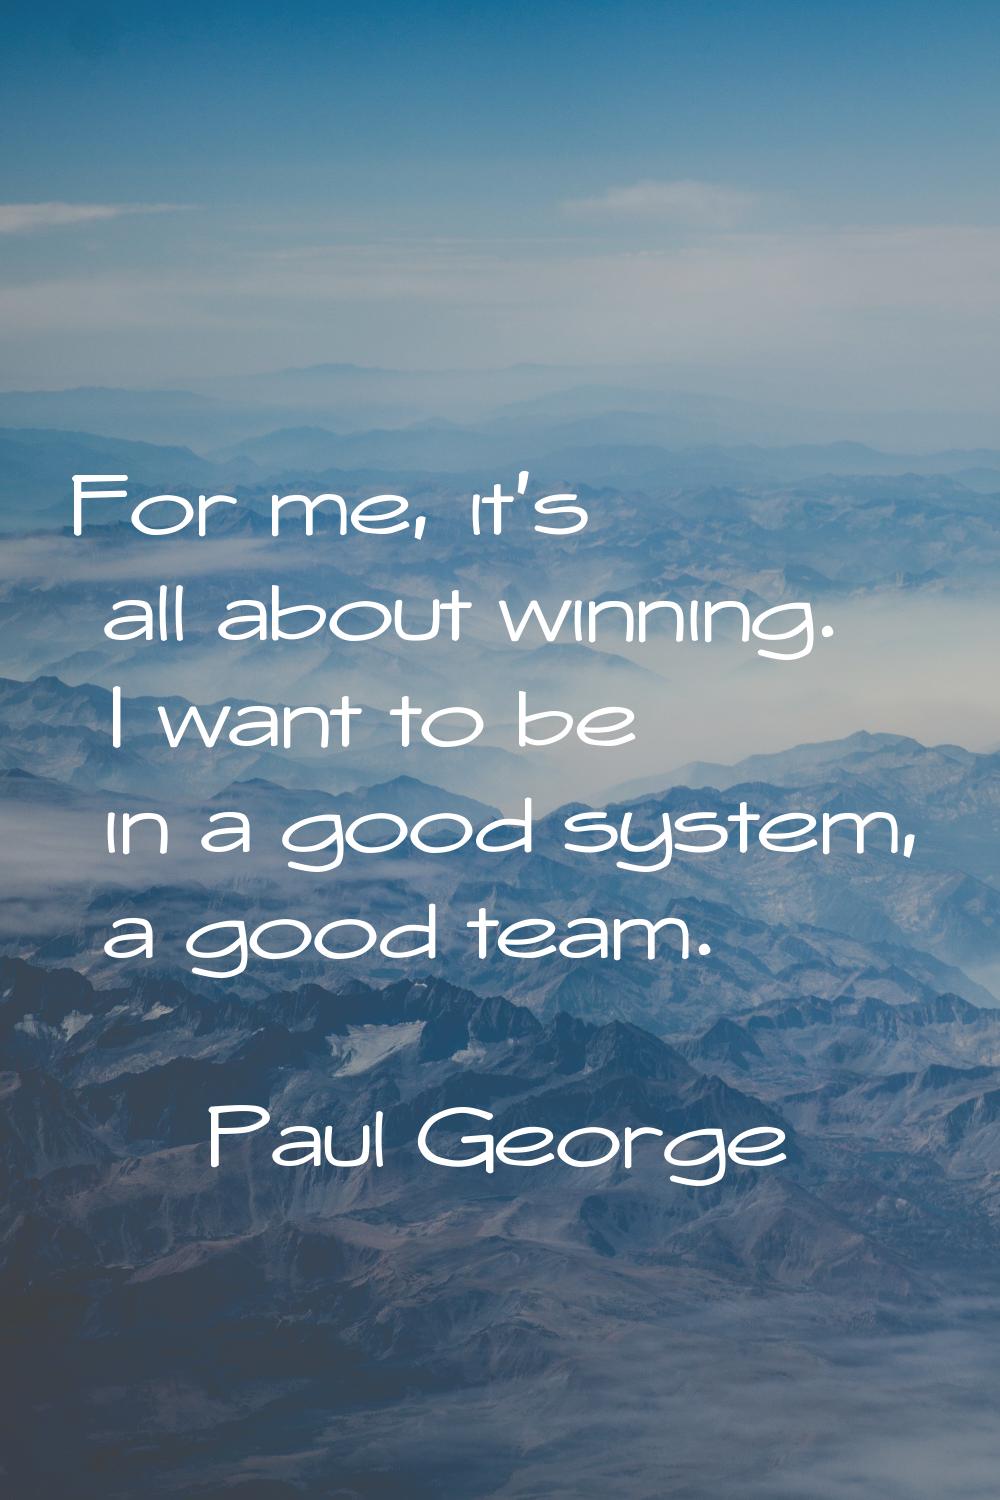 For me, it's all about winning. I want to be in a good system, a good team.